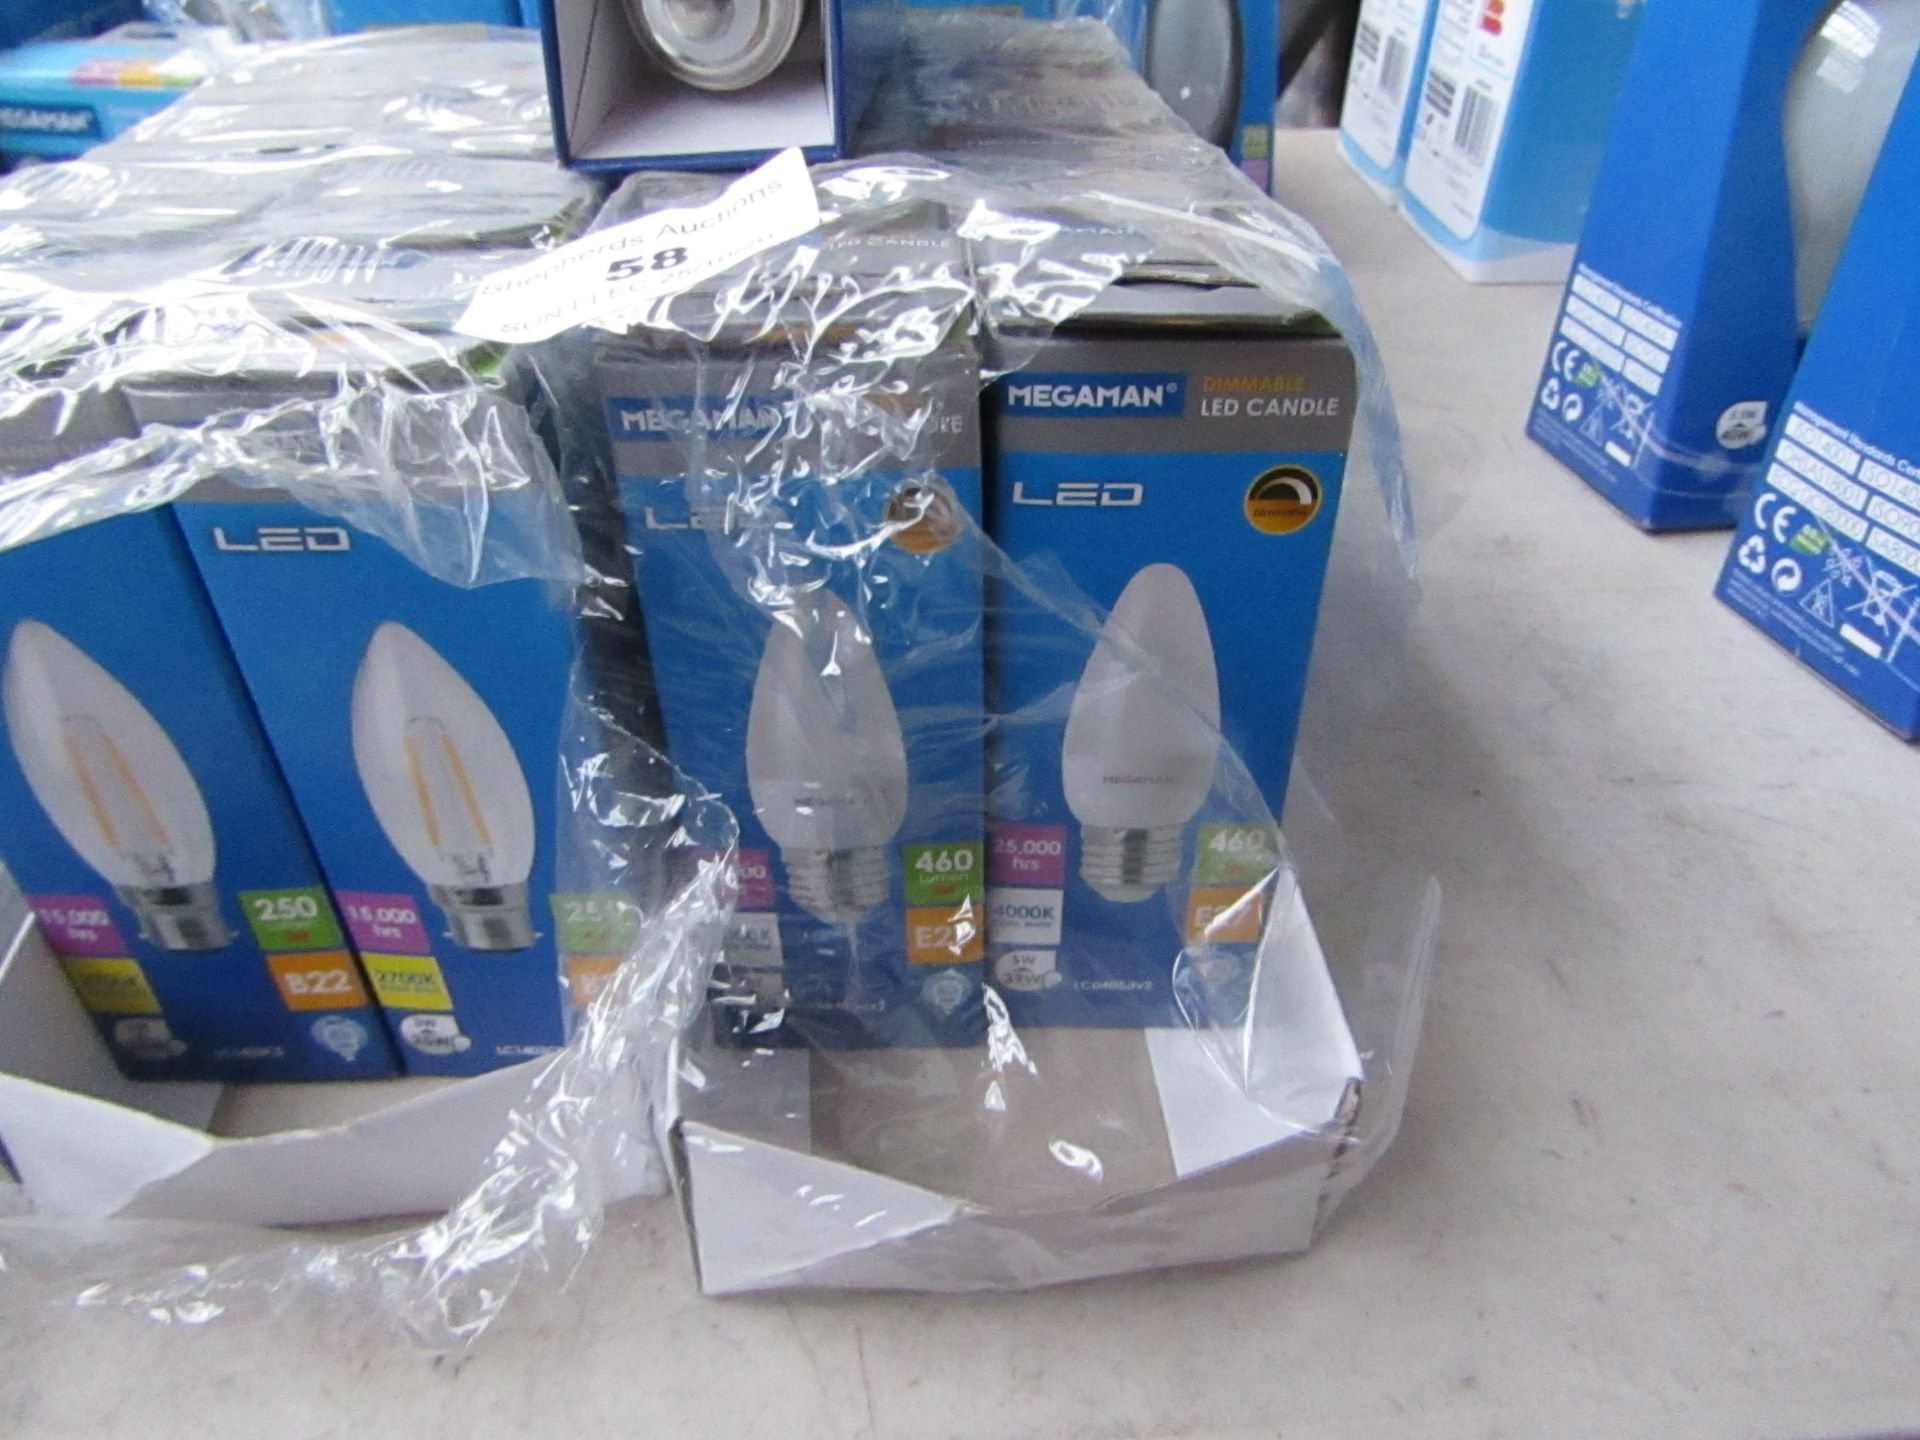 9x Megaman LED Candle bulb, new and boxed. 25,000Hrs / E27 / 460 Lumens